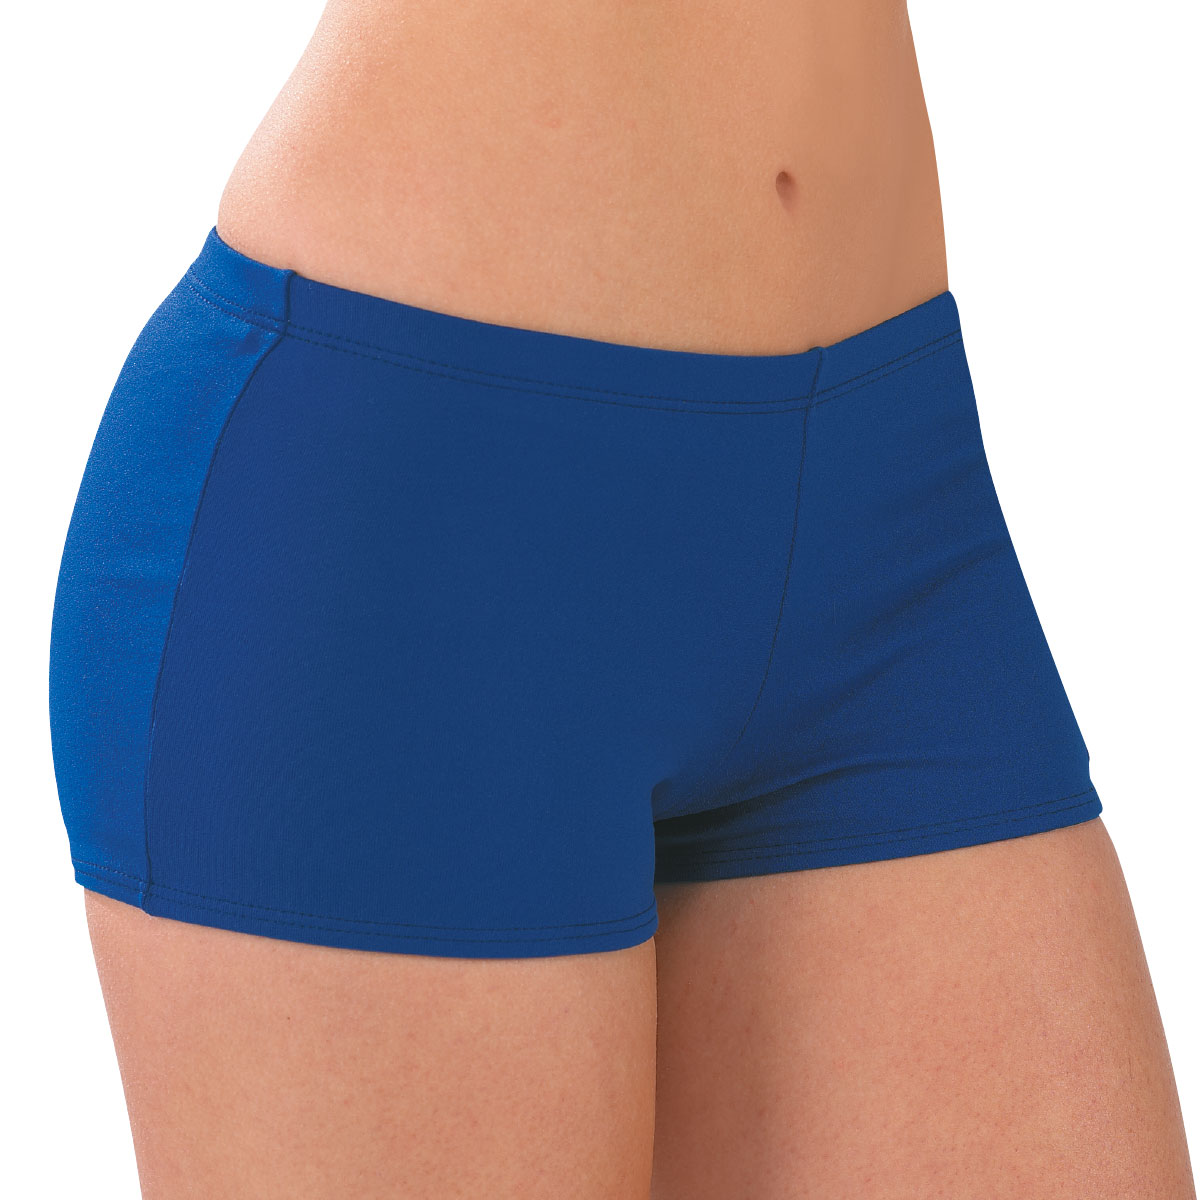 Girls Cheer / Dance Microfiber Polyester Spandex 'Boys-Cut' Brief Shorts in  Lots of Colors - Spandex, Sports Bras & Athletic Shorts